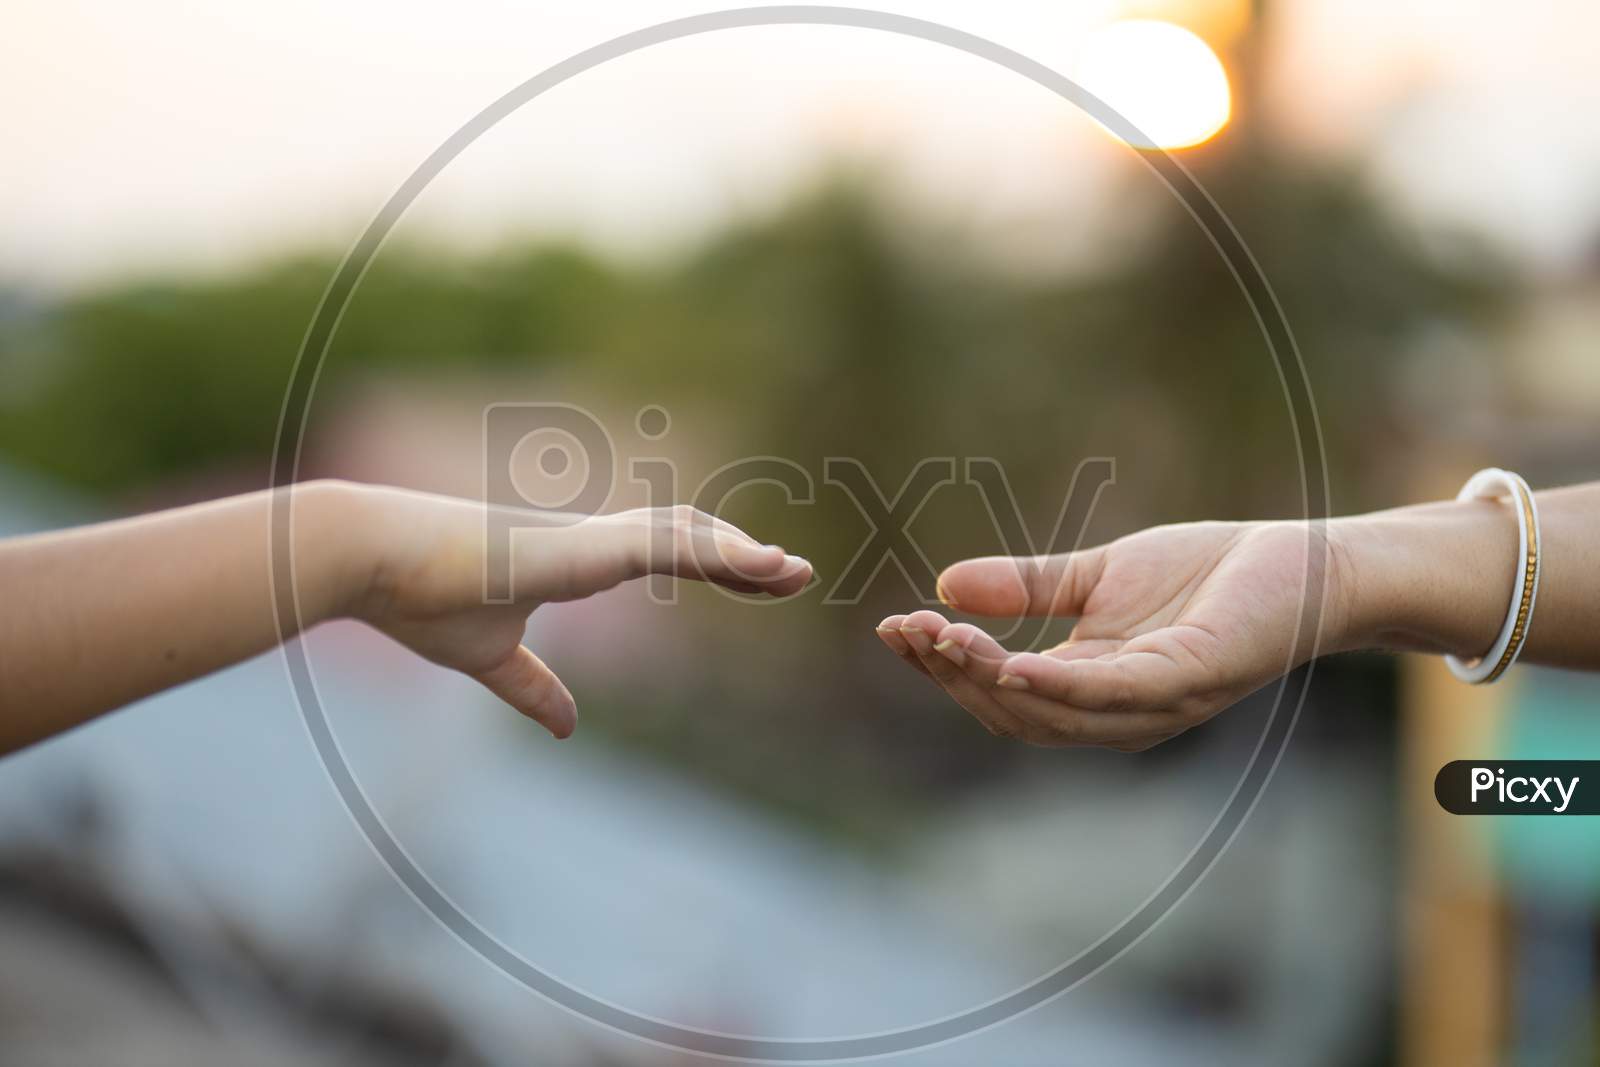 Woman And Child Reaching Out To Hold Hands Outdoors At Sunset